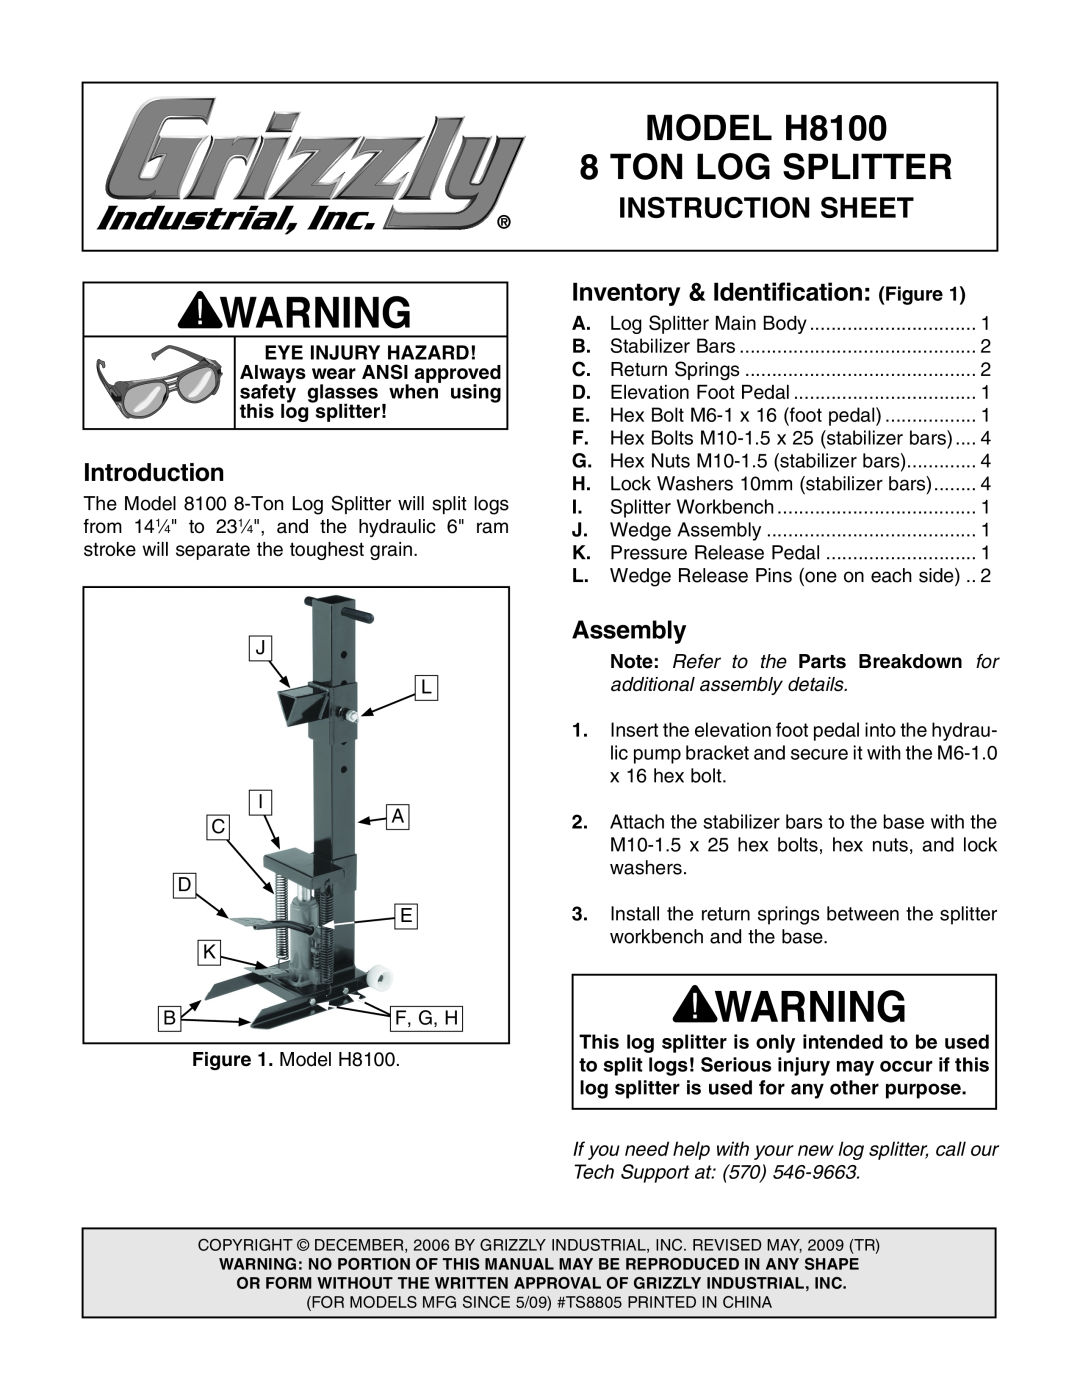 Grizzly instruction sheet Introduction, Assembly, MODEL H8100, Ton Log Splitter, Instruction Sheet 